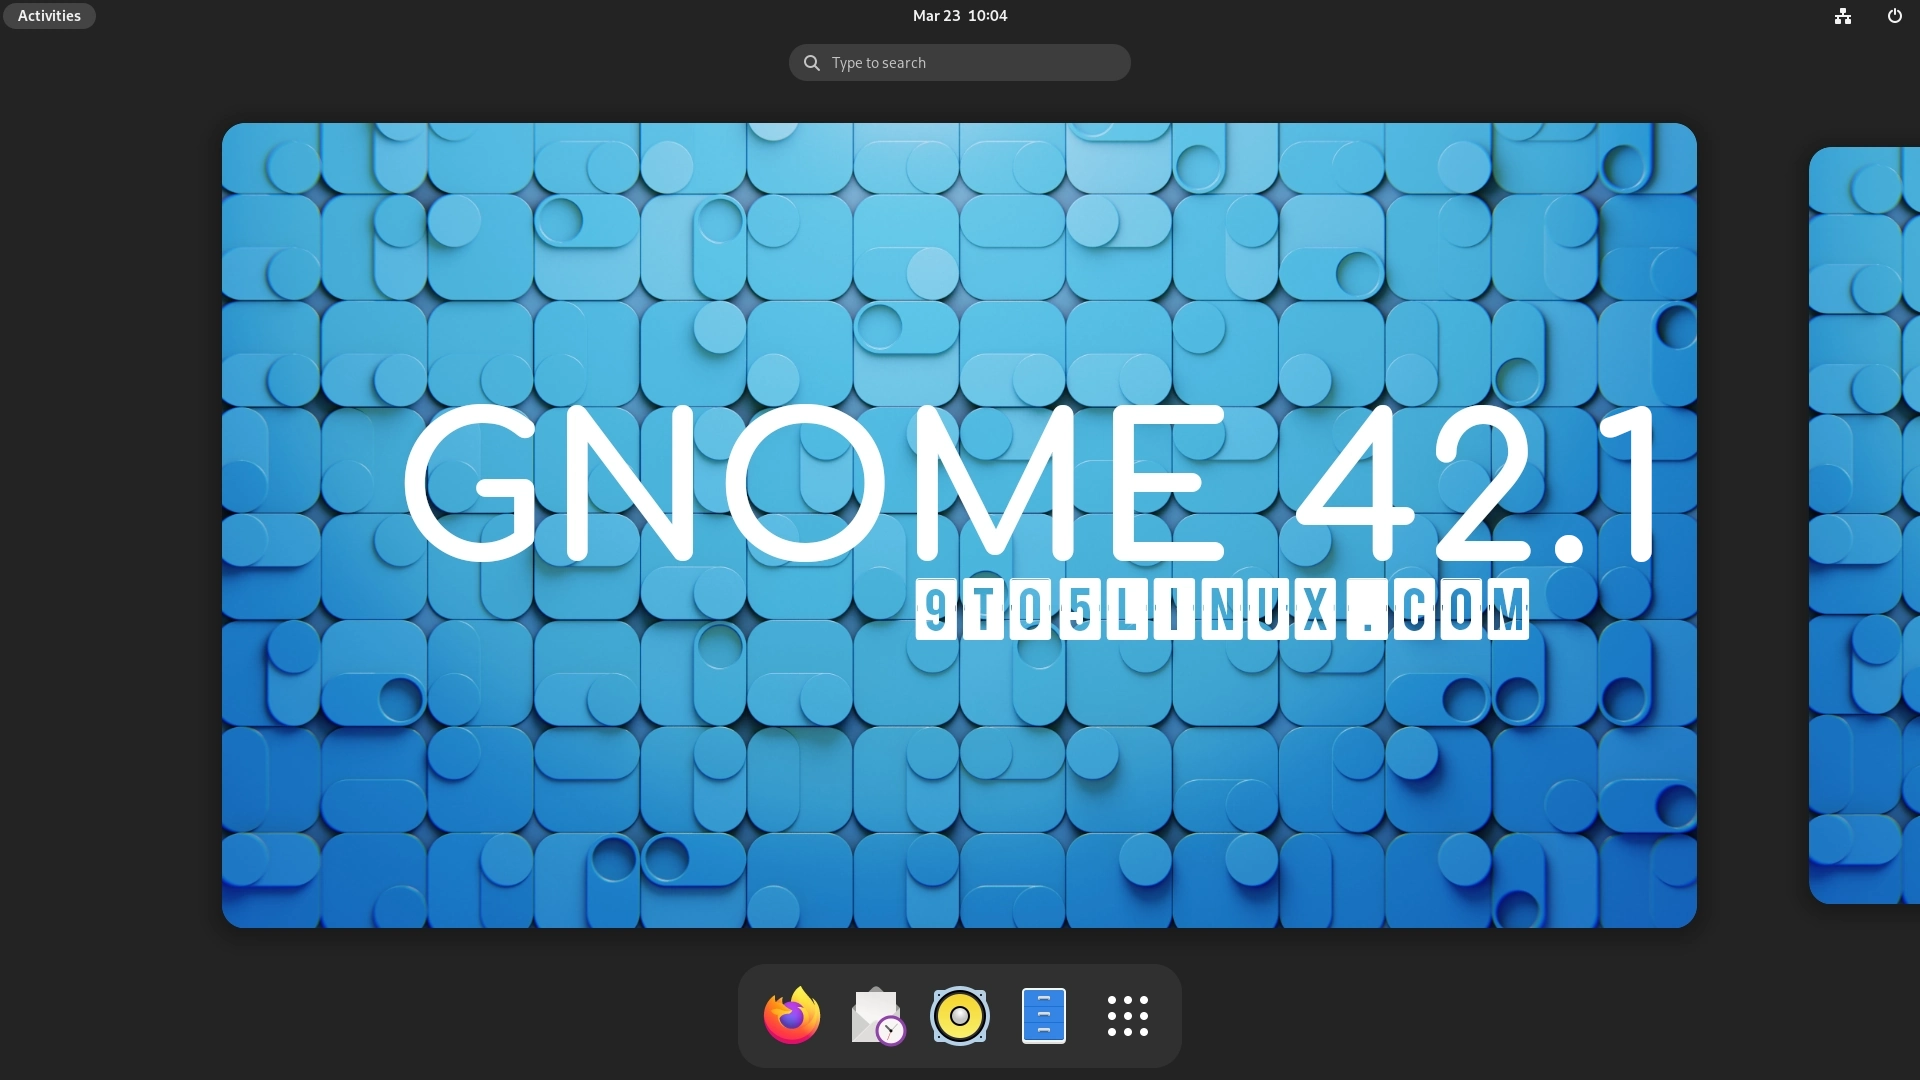 GNOME 42.1 Is Out with Many Improvements to Software, Nautilus, and Control Center